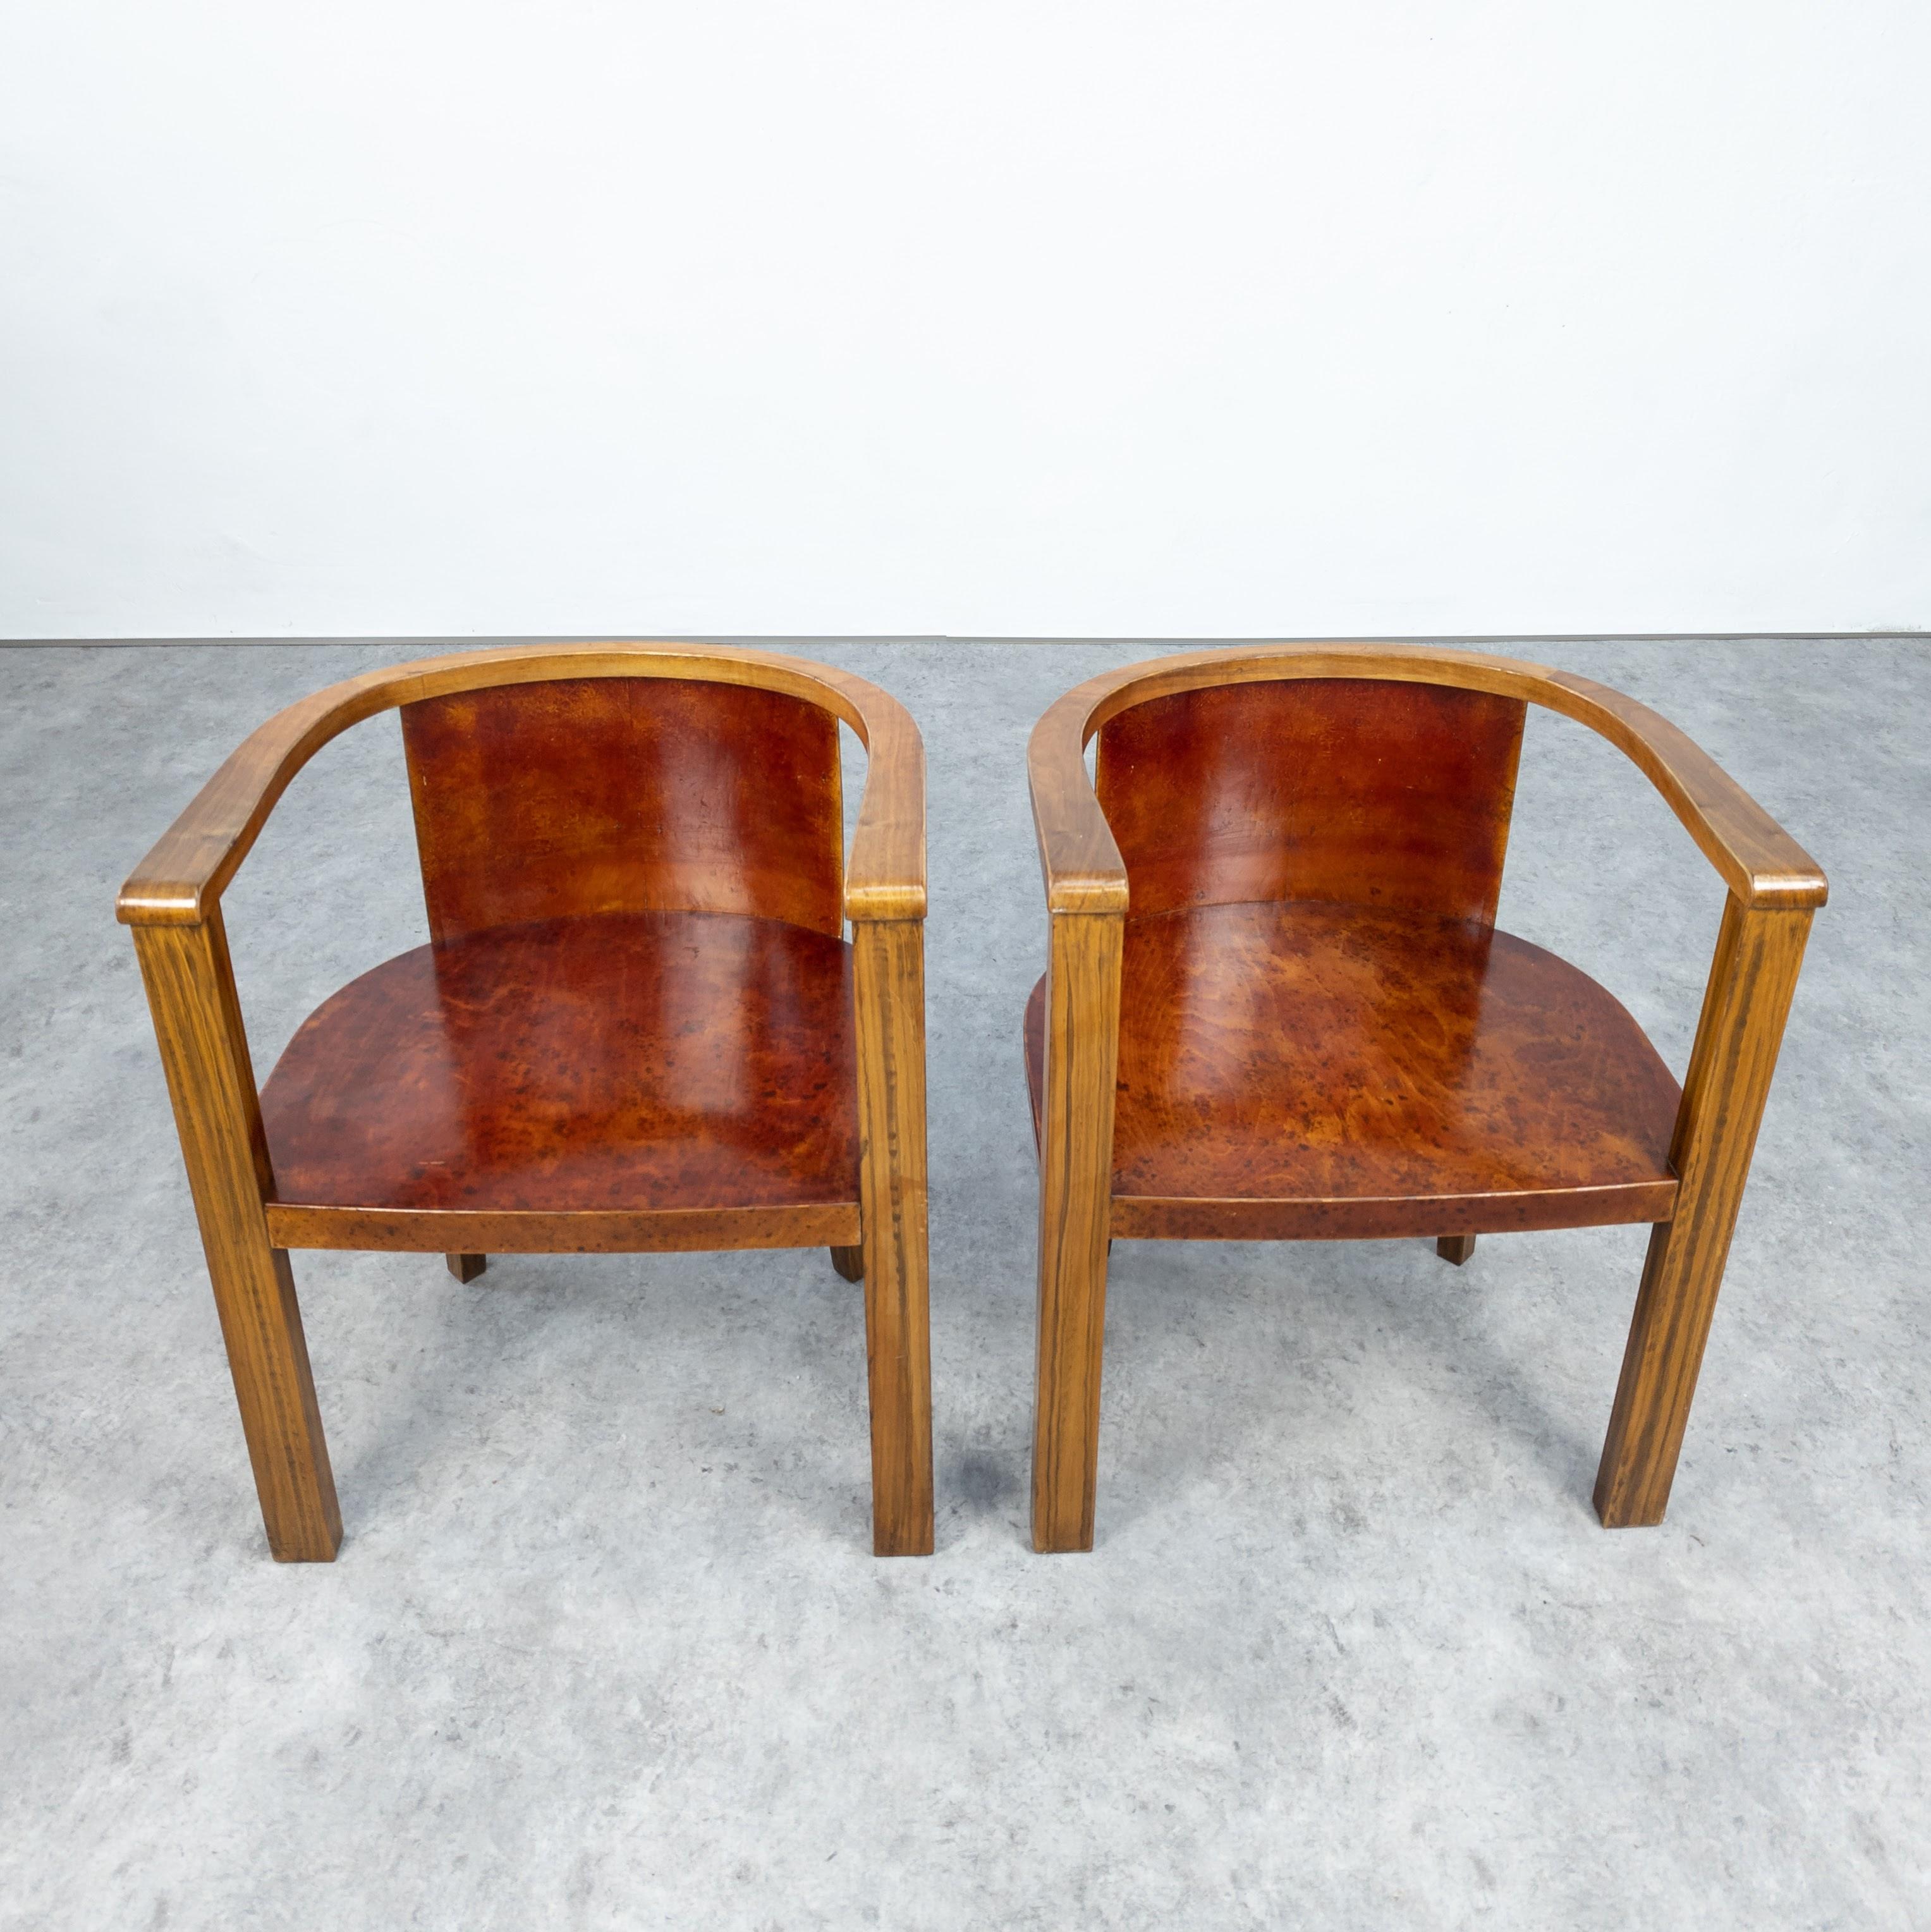 Mid-20th Century Pair of 1930's German Modernist Barrel Chairs For Sale